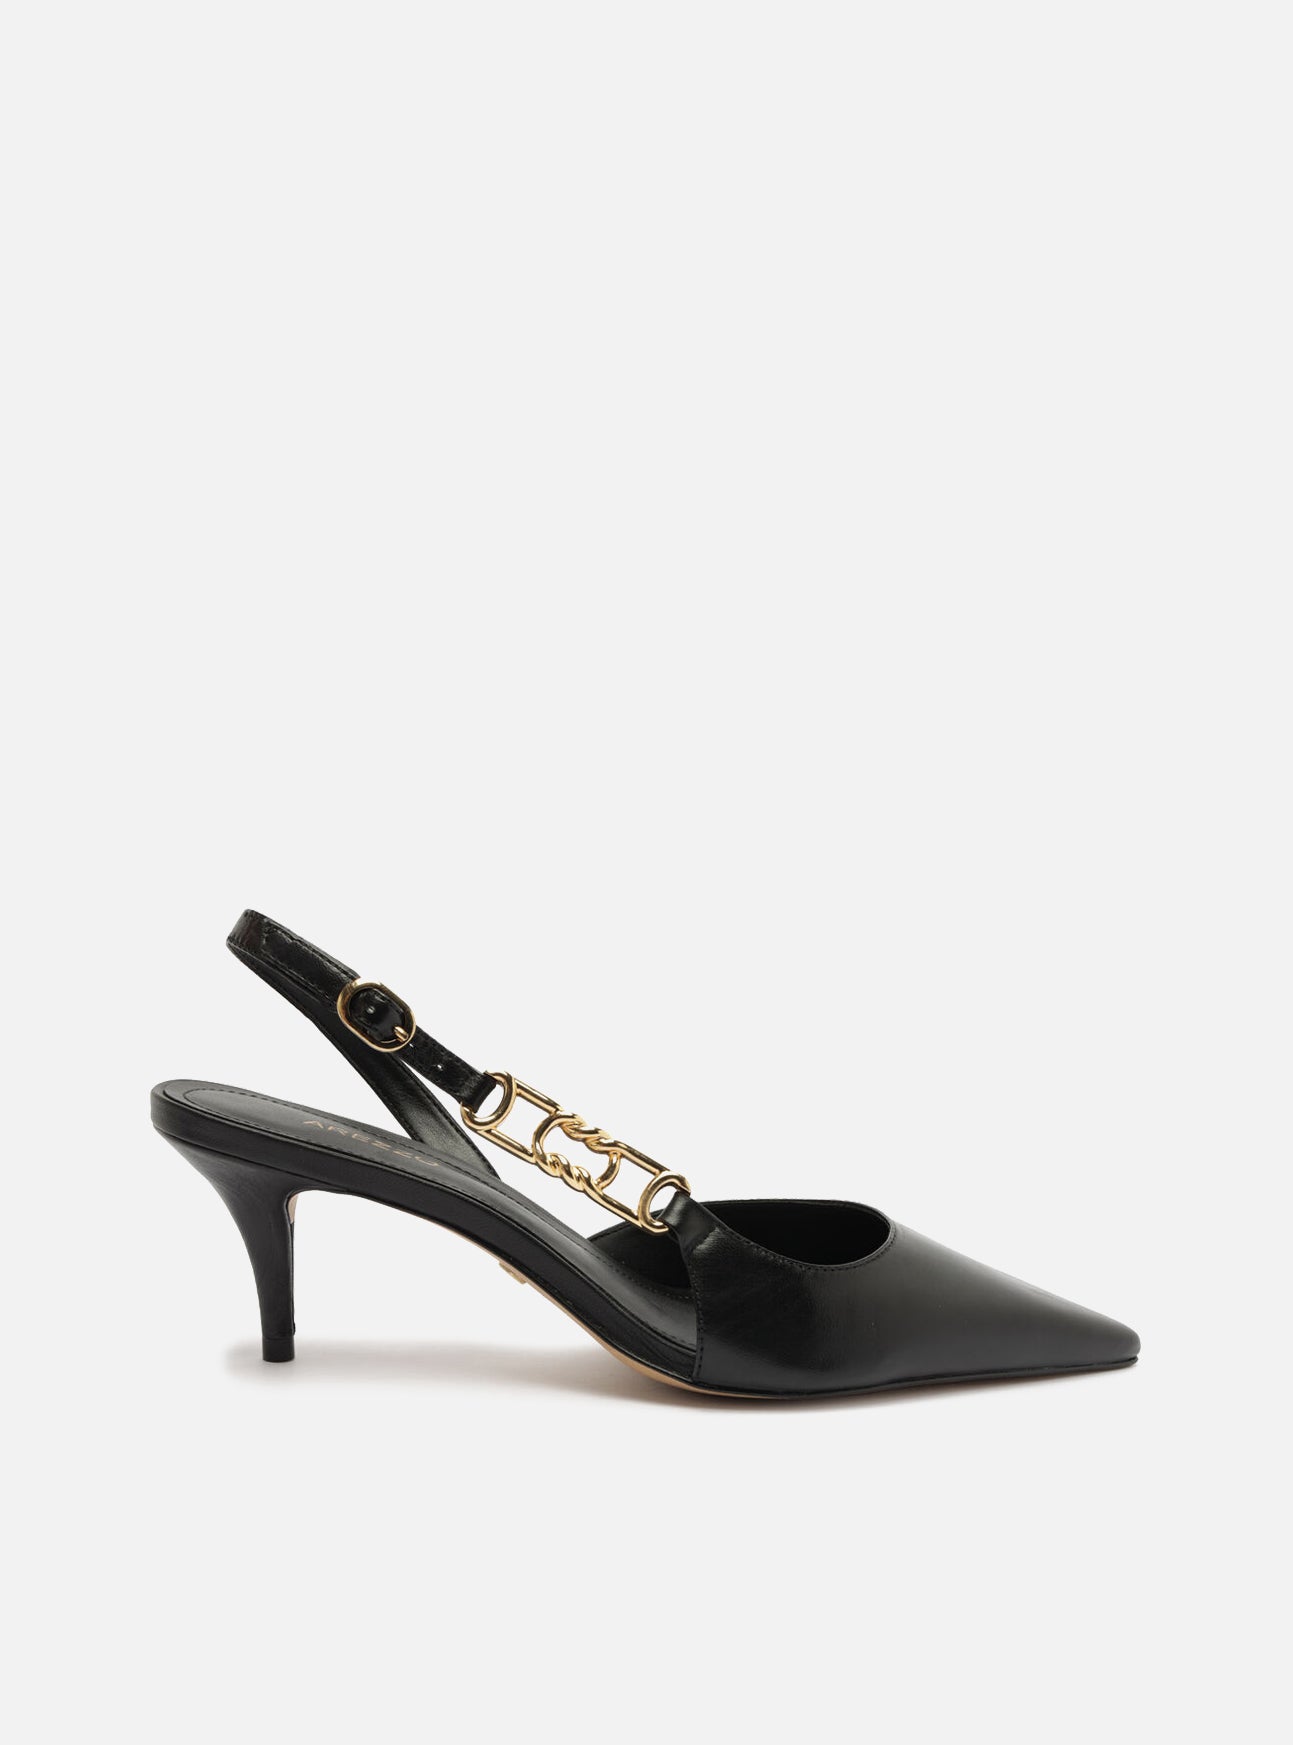 Pumps and Heels: Stiletto Pumps, High Heels & More - Arezzo